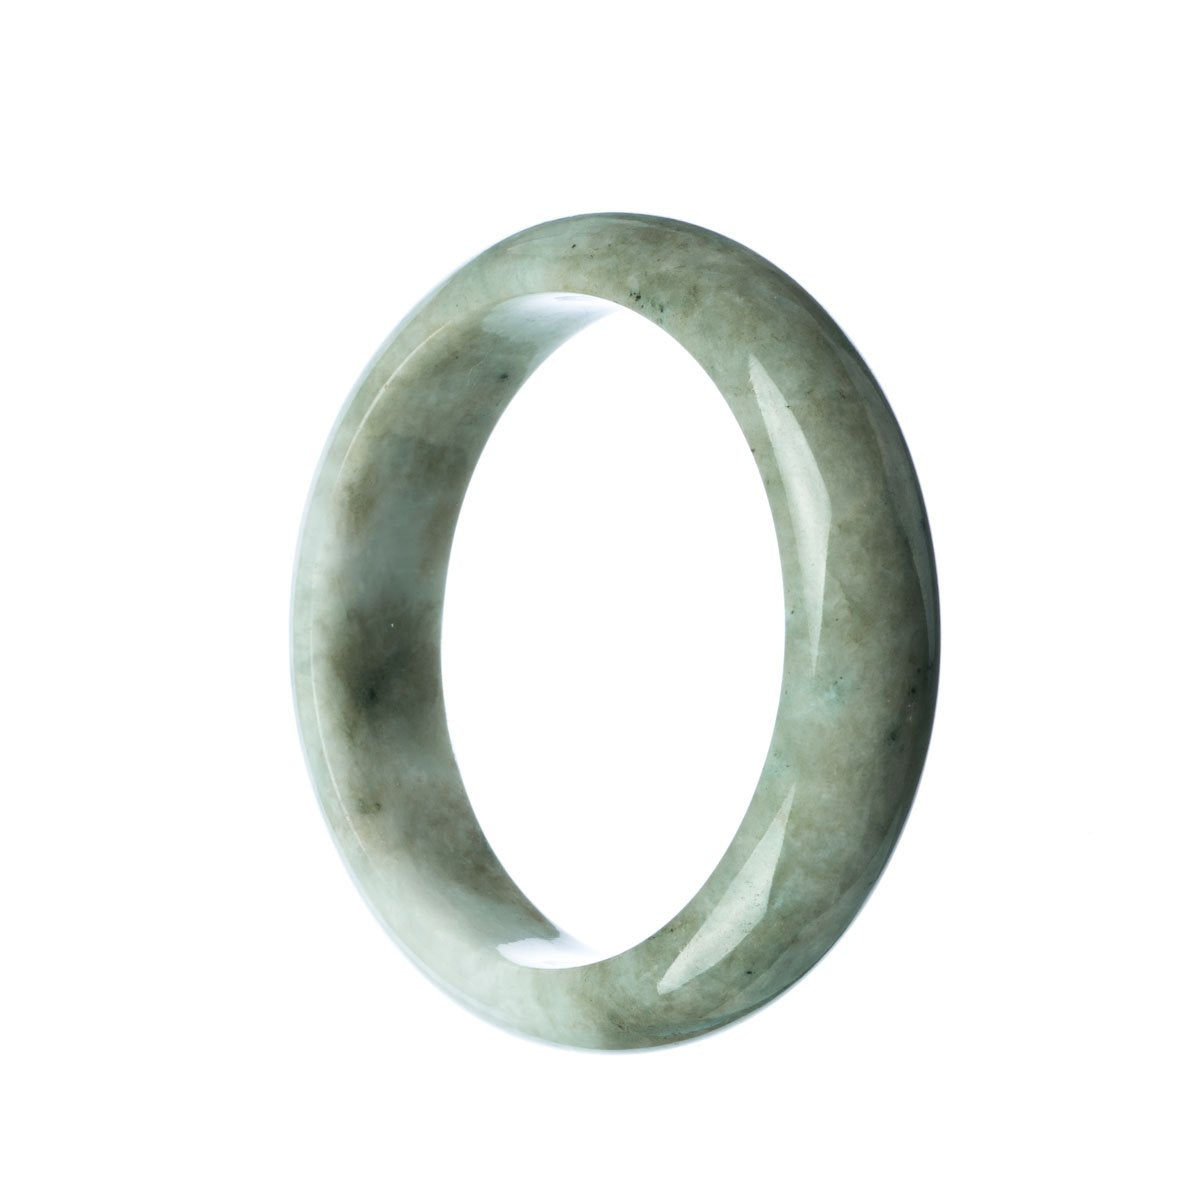 A close-up image of an elegant grey green traditional jade bracelet with a half moon shape, measuring 59mm in size. This bracelet is a genuine Type A jade, known for its authenticity and quality. It is a stunning piece of jewelry from the MAYS™ collection.